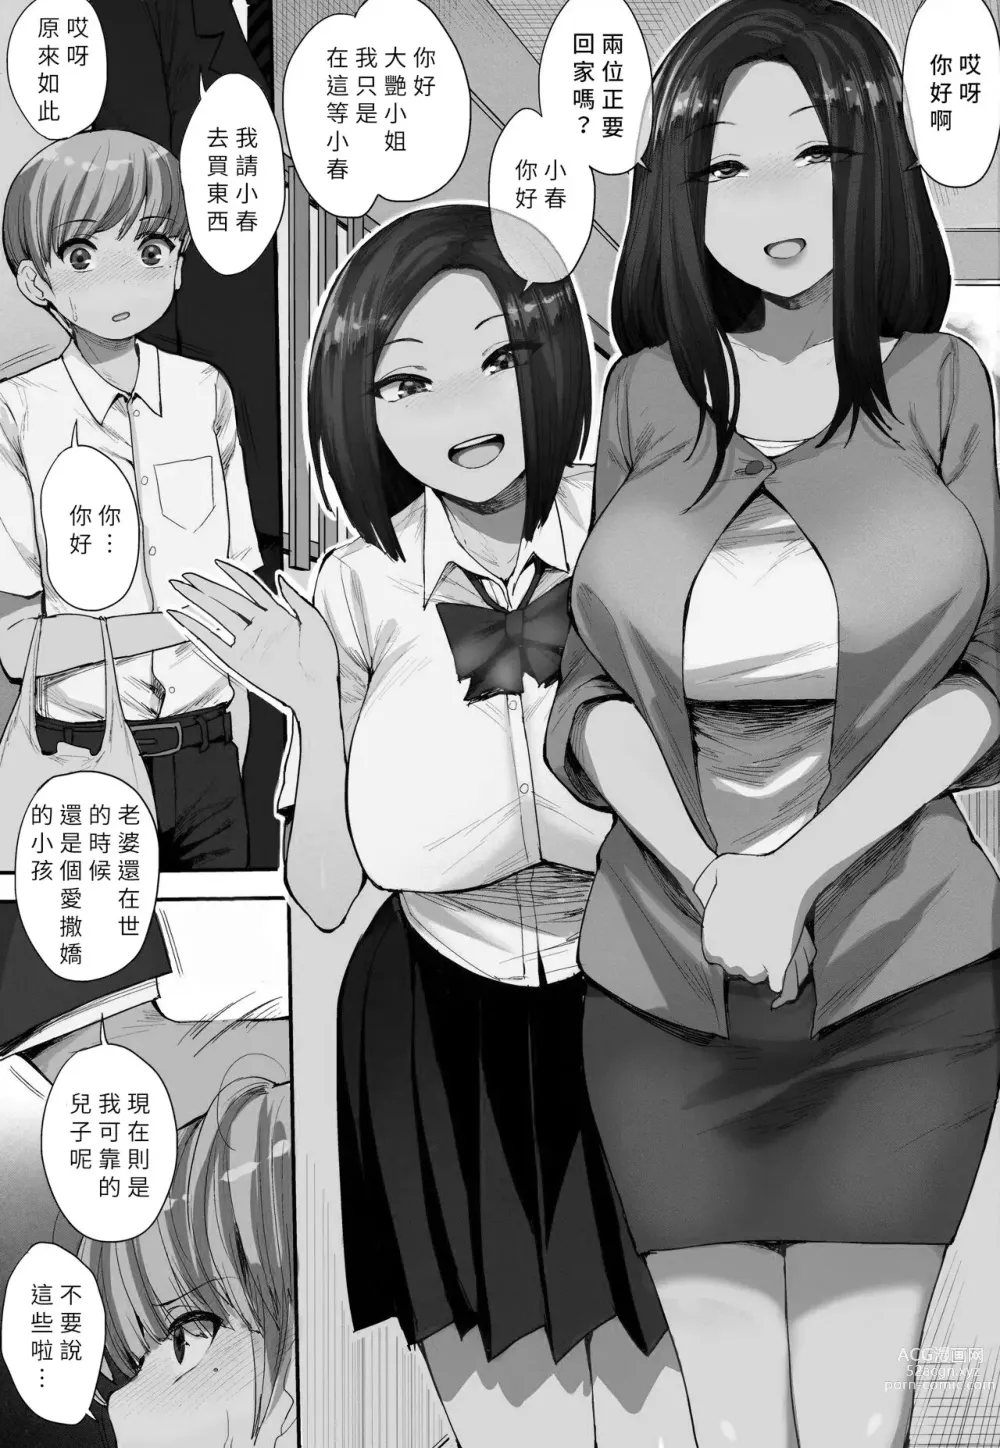 Page 2 of doujinshi 魅魔鄰居 (decensored)